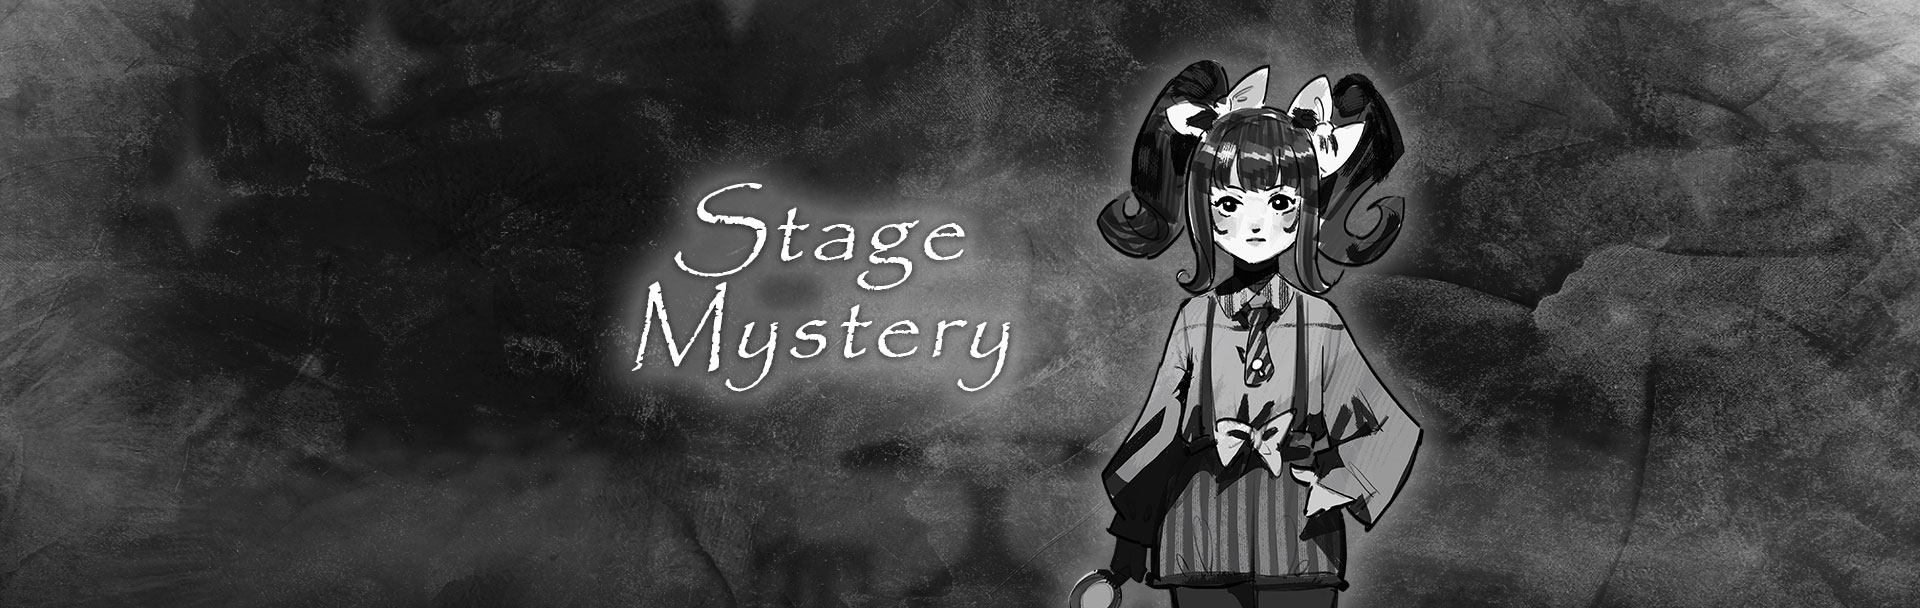 Stage Mystery